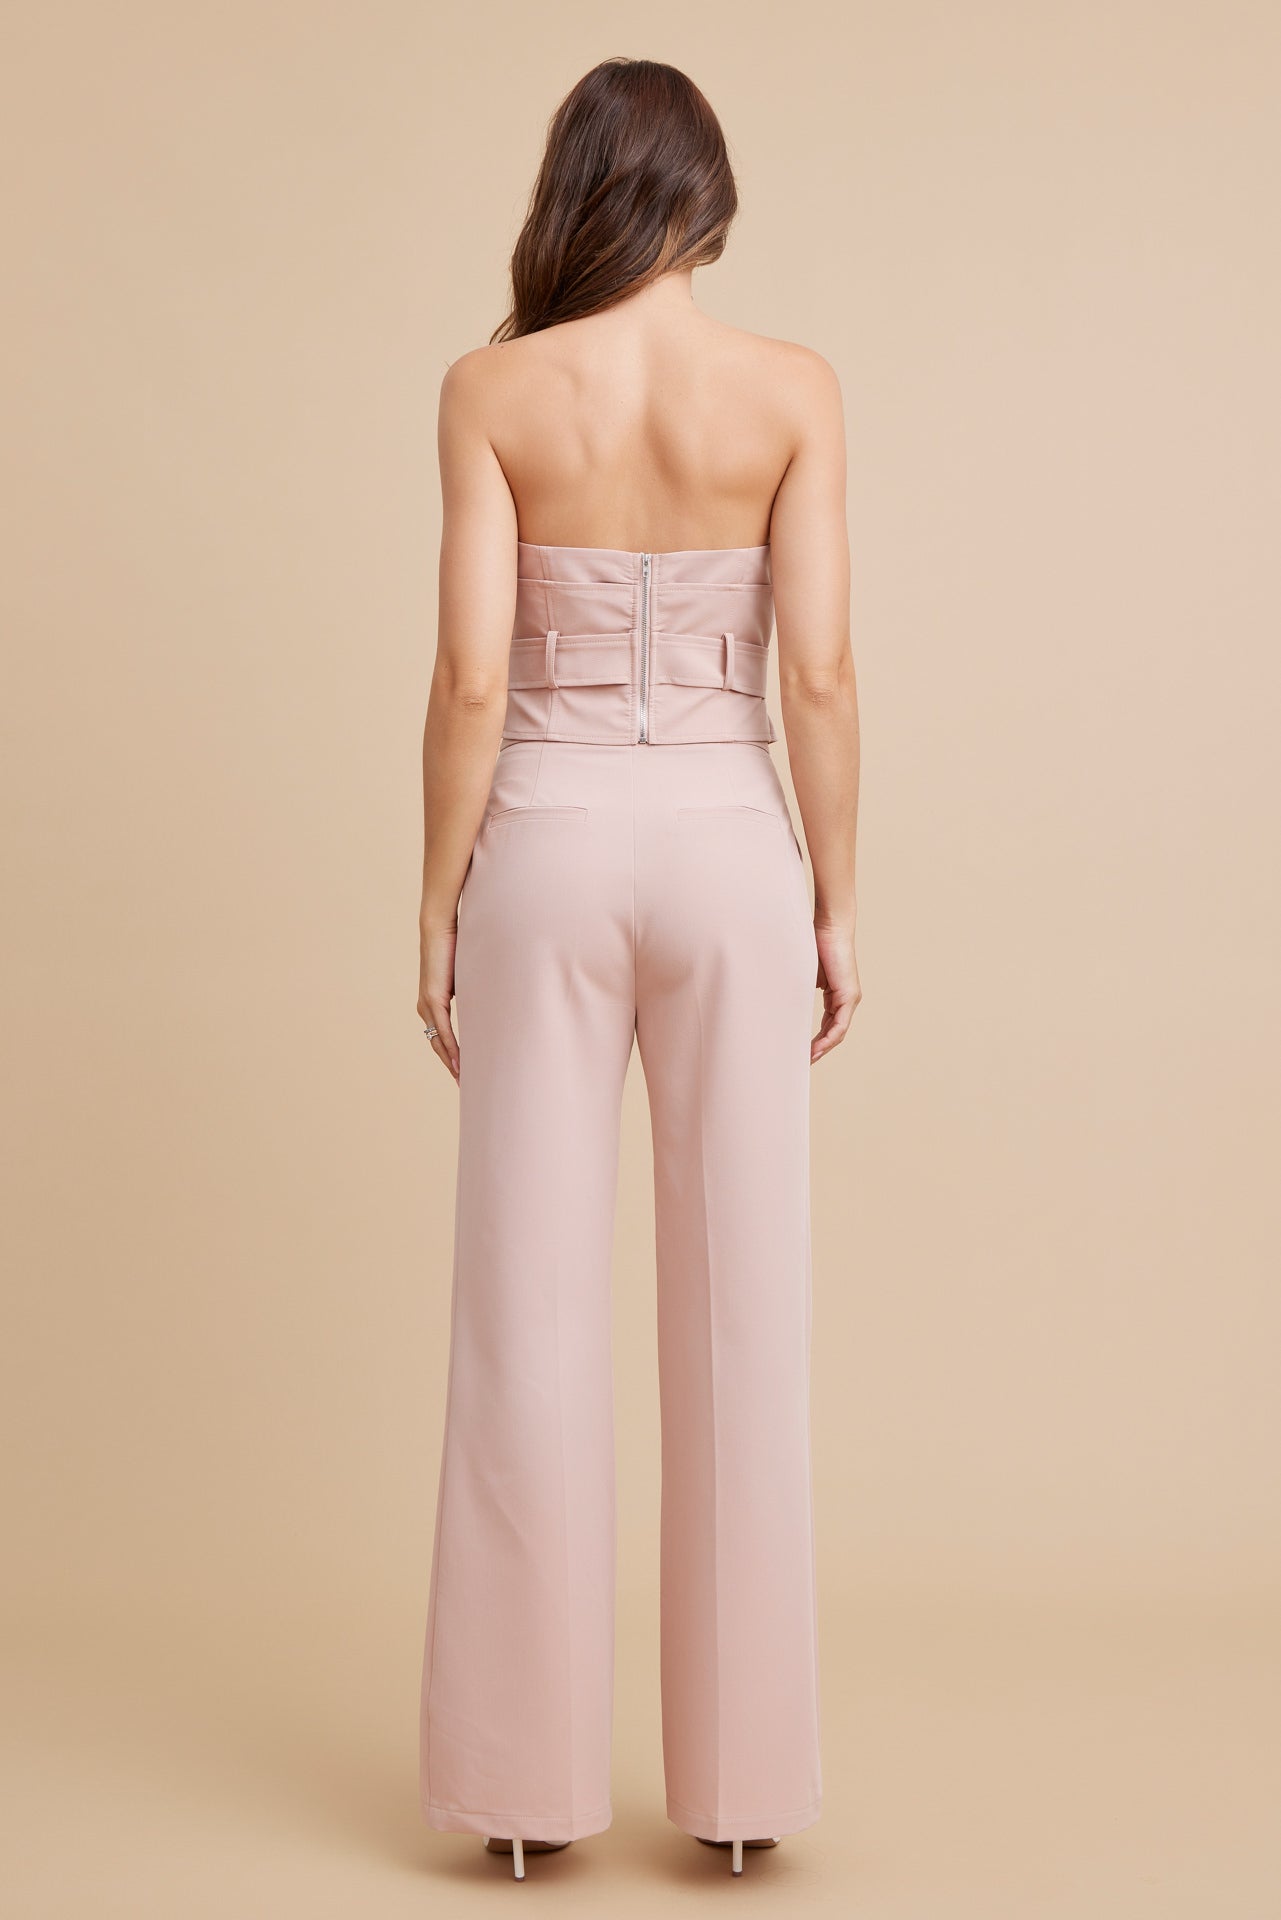 Woven Bustier Tube Top and Pants Set